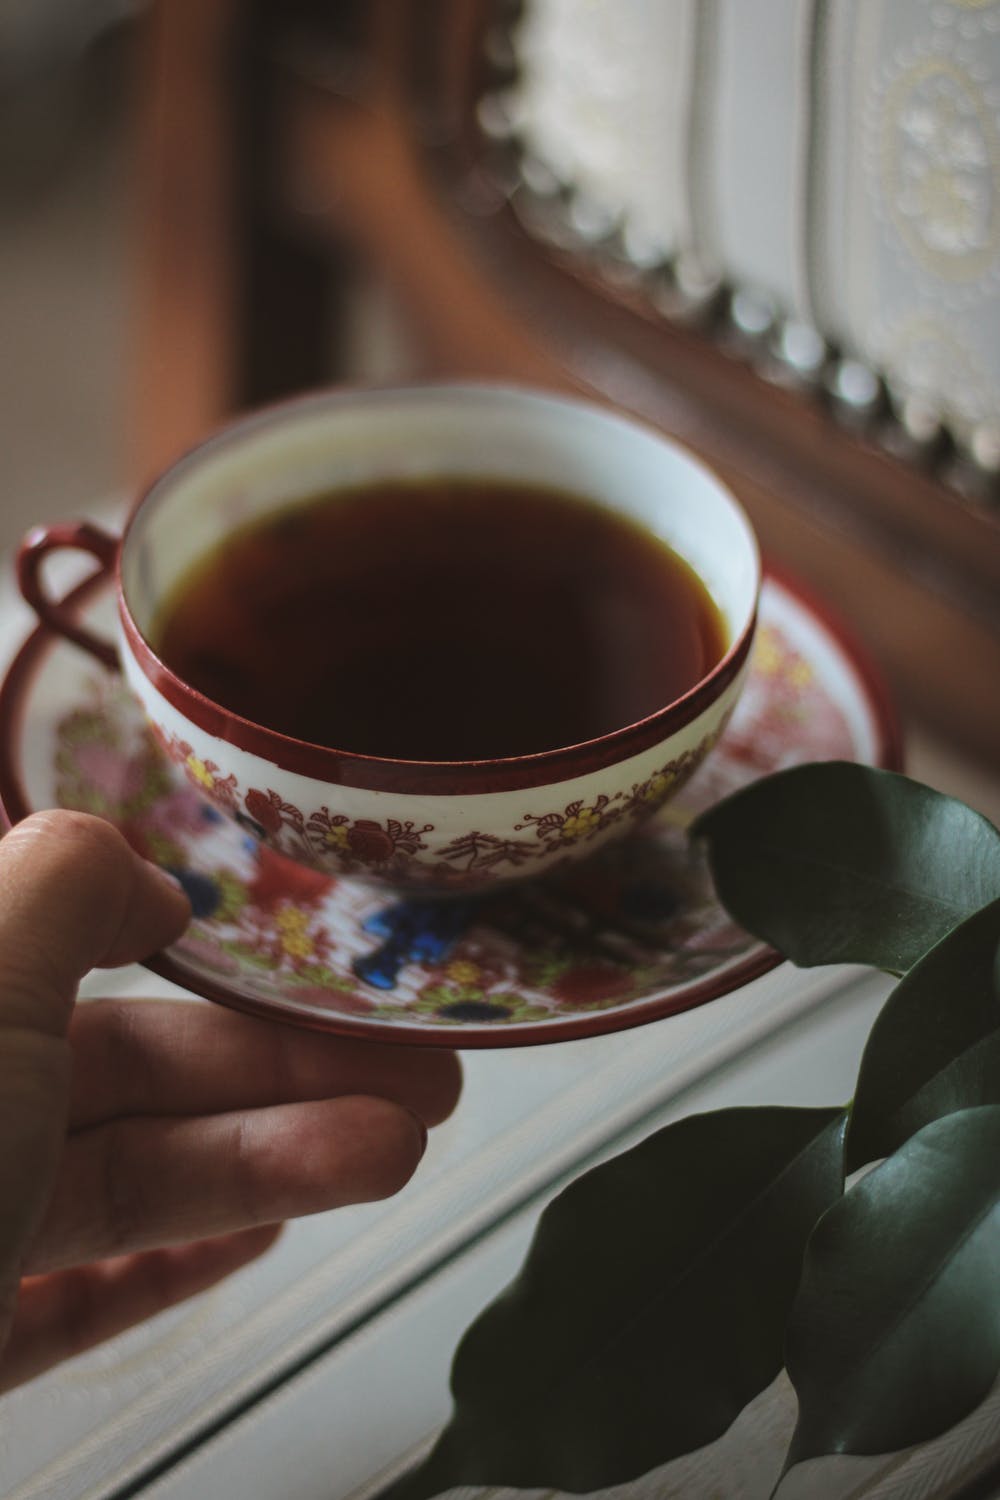 Evie picked up a cup of hot tea and some sandwiches | Source: Pexels